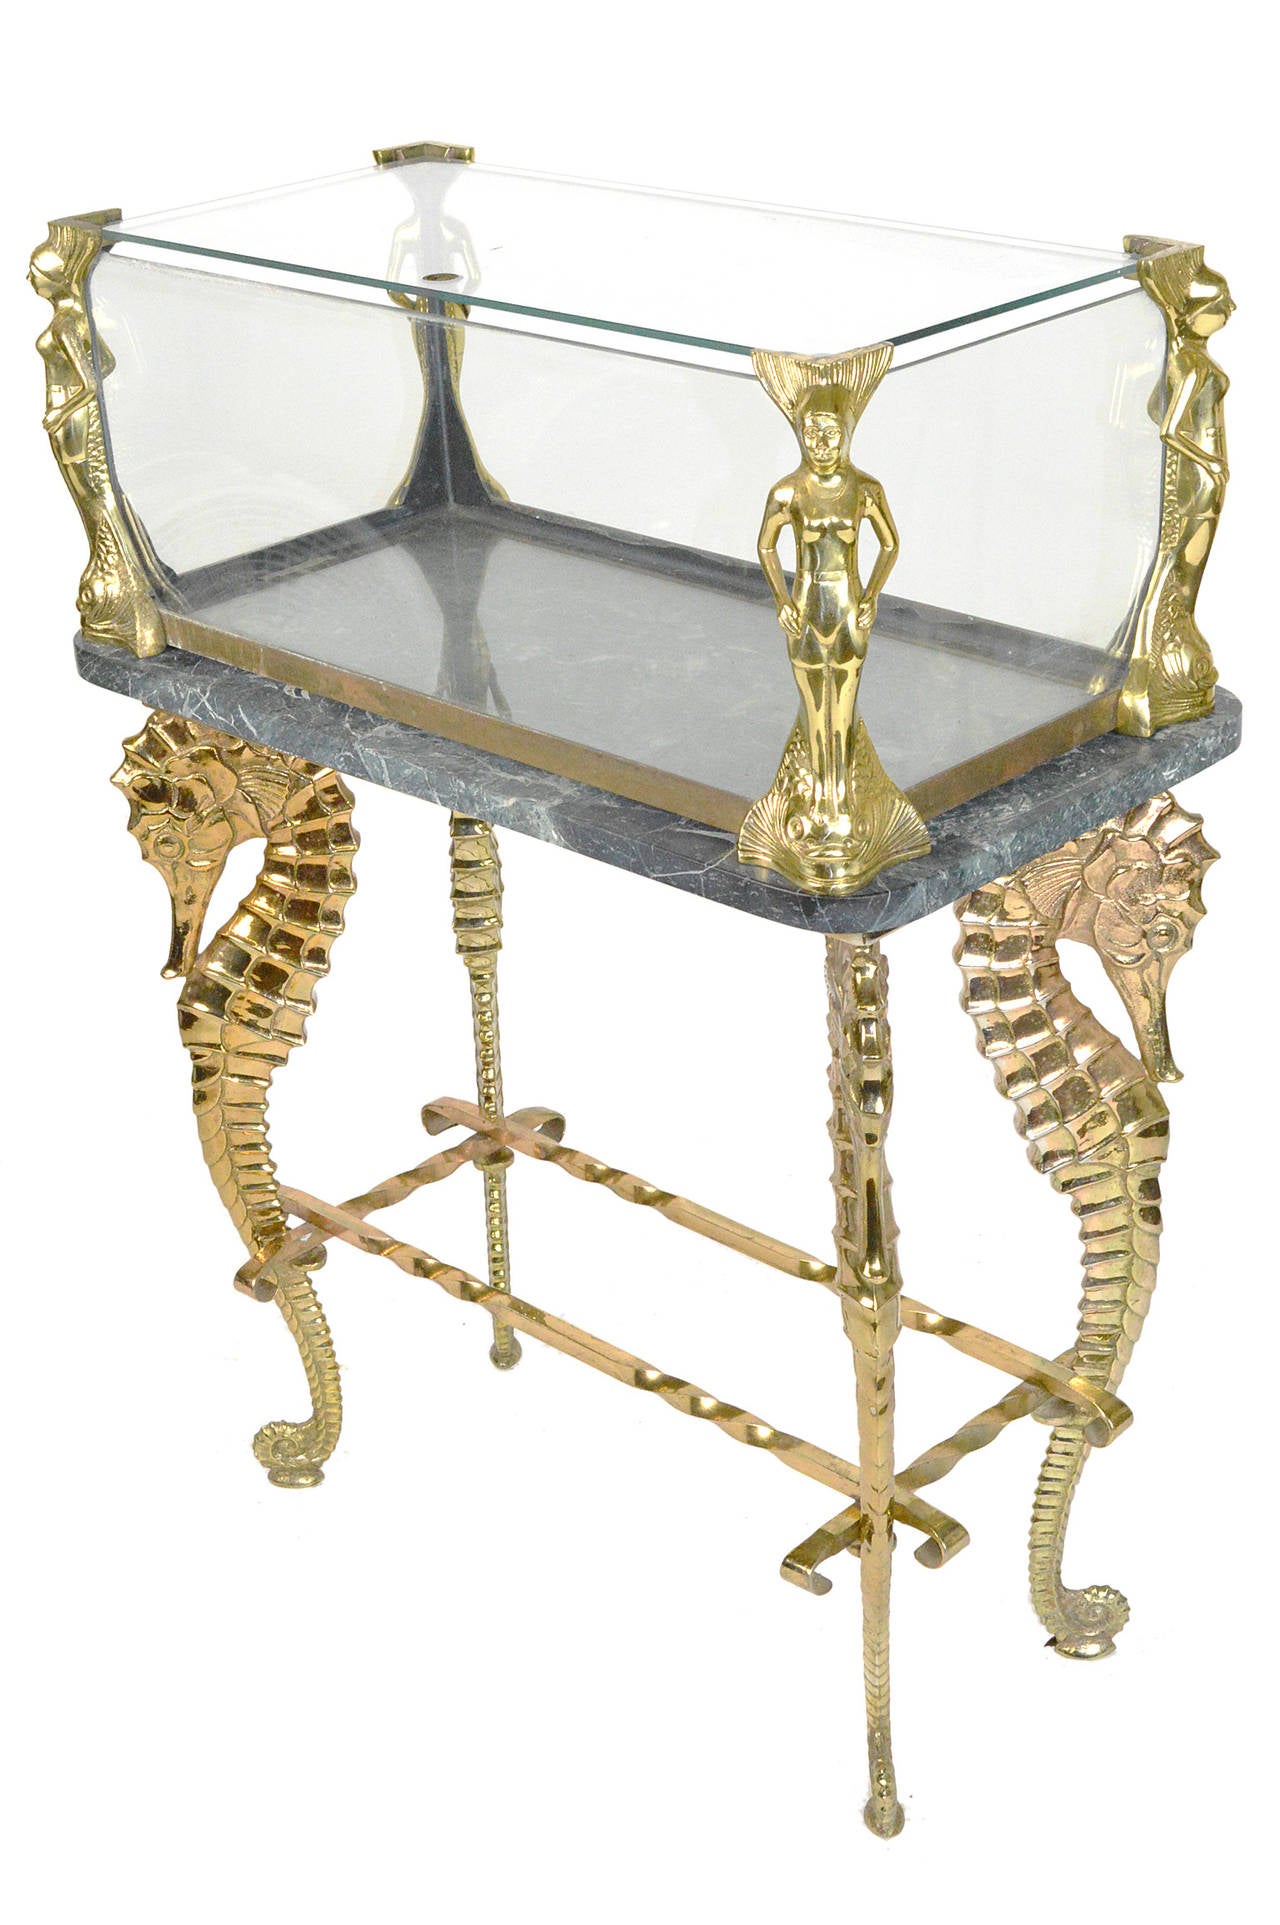 A fine brass seahorse aquarium on stand with mermaid mounts raised on a conforming base over seahorse form legs.